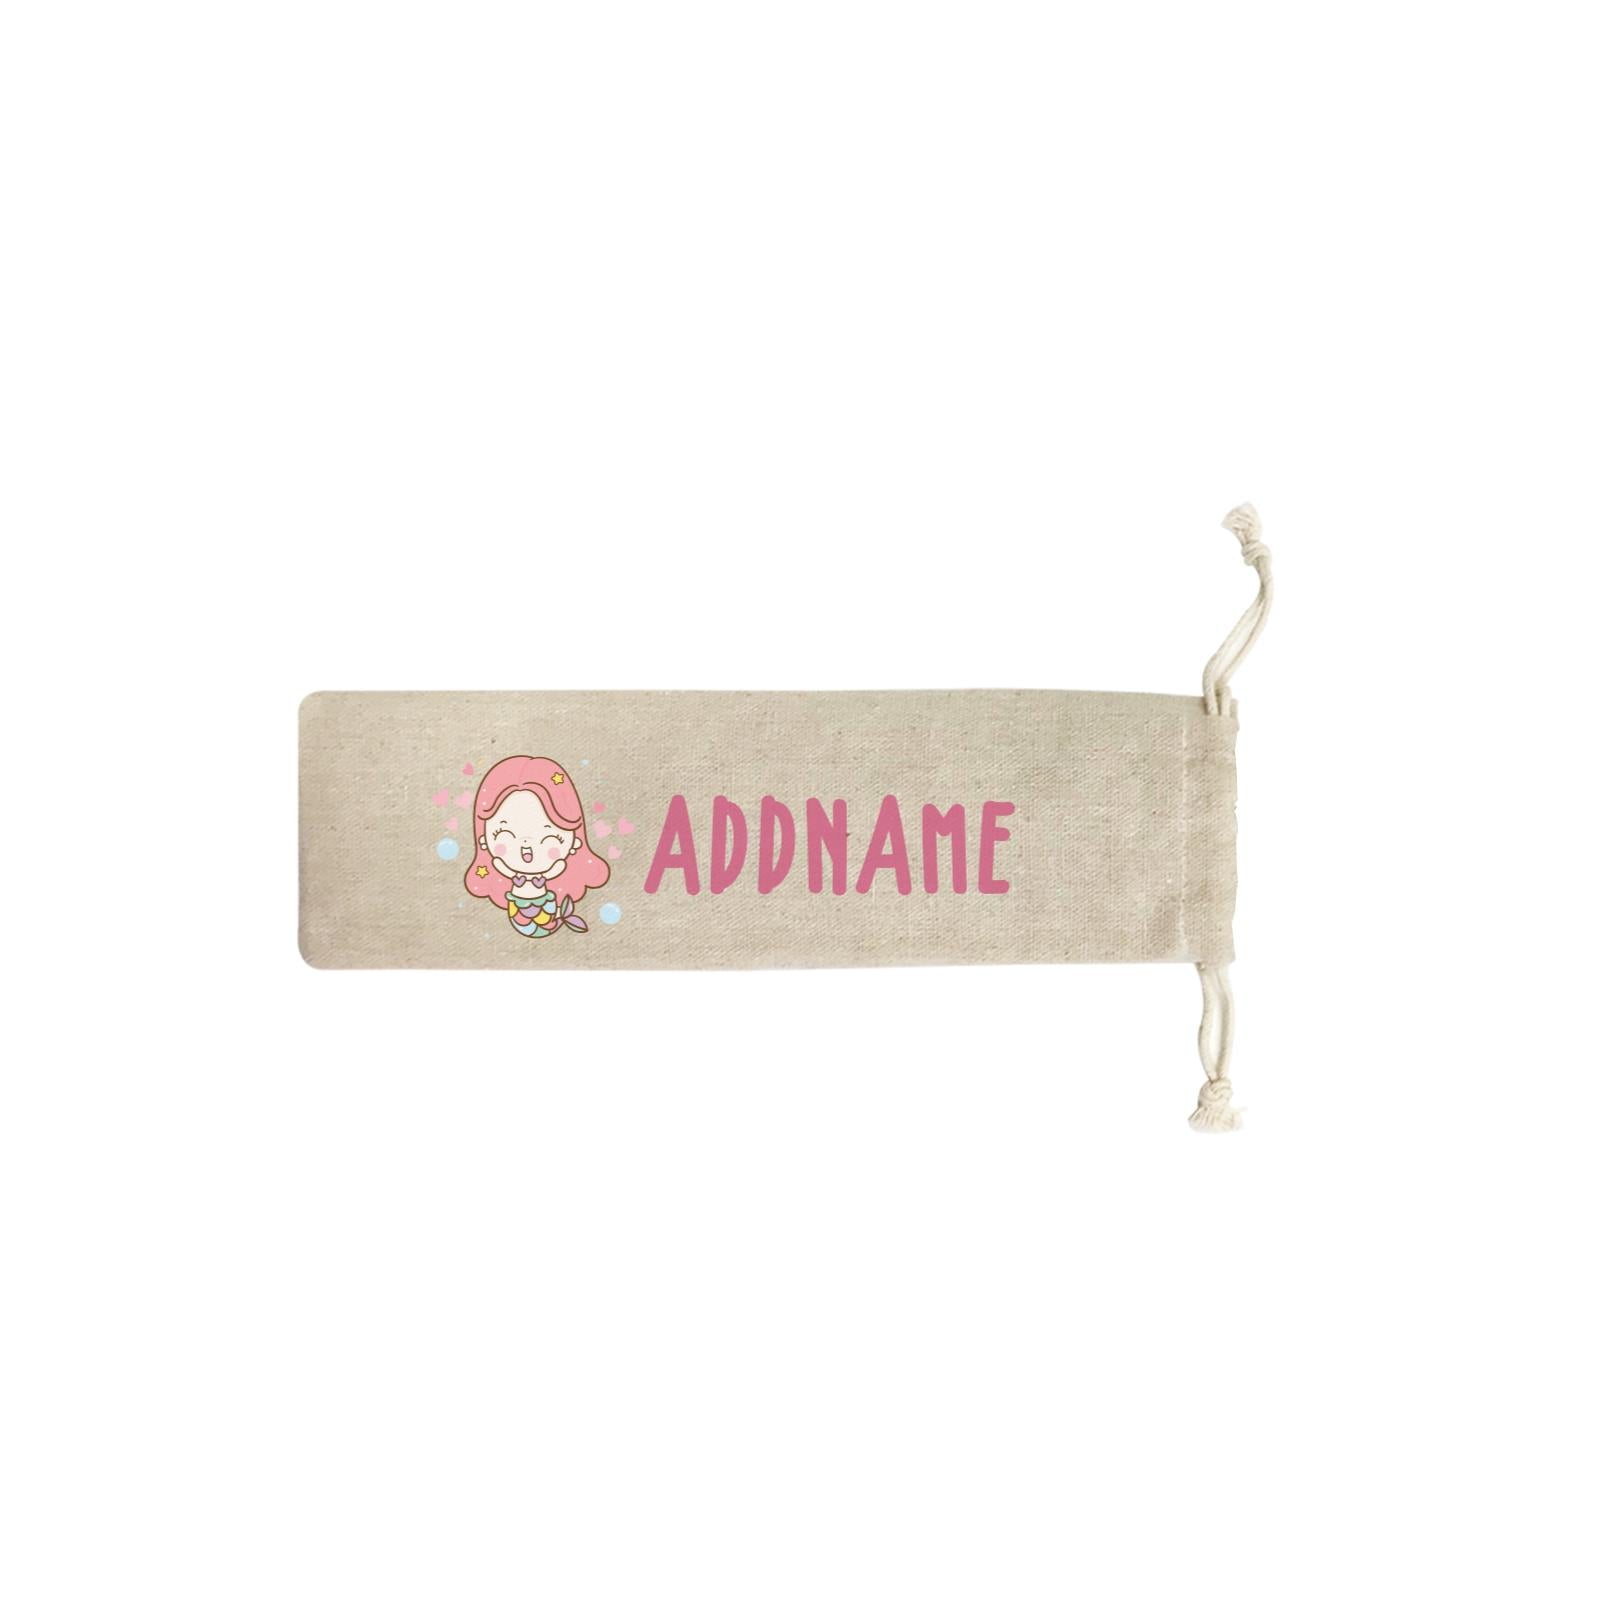 Unicorn And Princess Series Cute Happy Mermaid Girl Addname SB Straw Pouch (No Straws included)